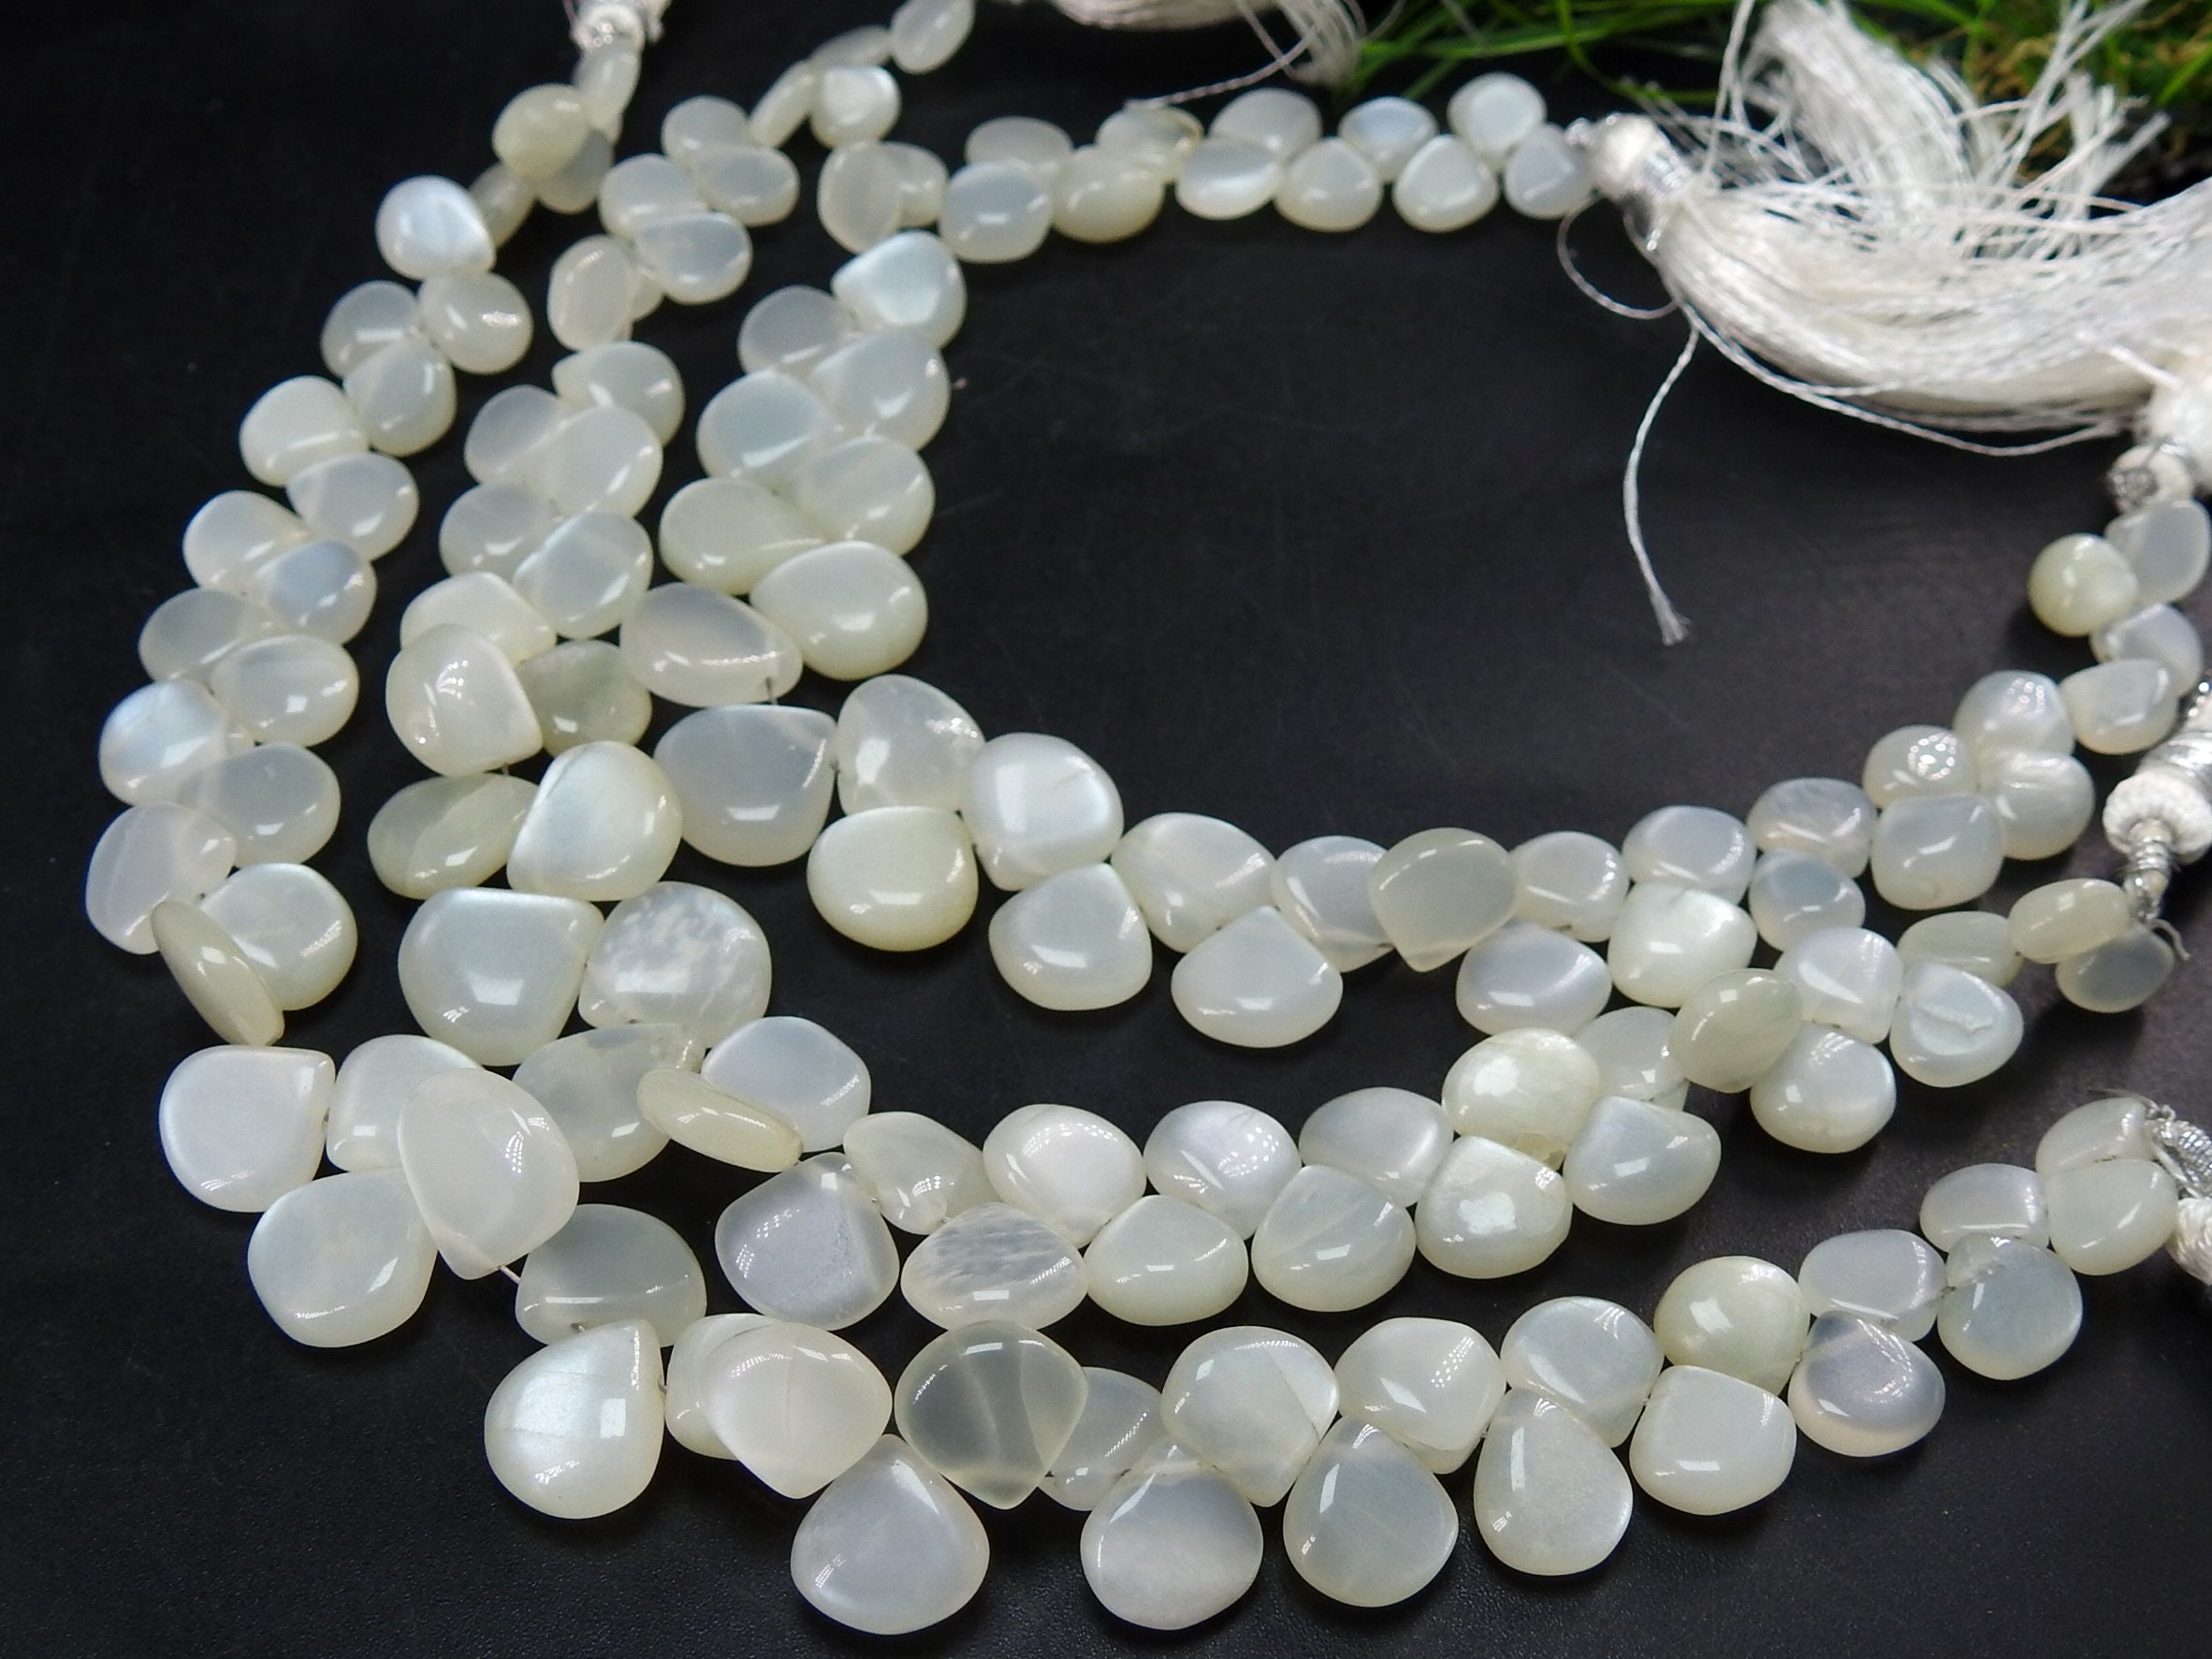 White Moonstone Smooth Heart,Teardrop,Drop,Loose Stone,Handmade Bead,For Making Jewelry,Wholesaler,Supplies 8Inch 6X12MM Approx (pme)BR2 | Save 33% - Rajasthan Living 18